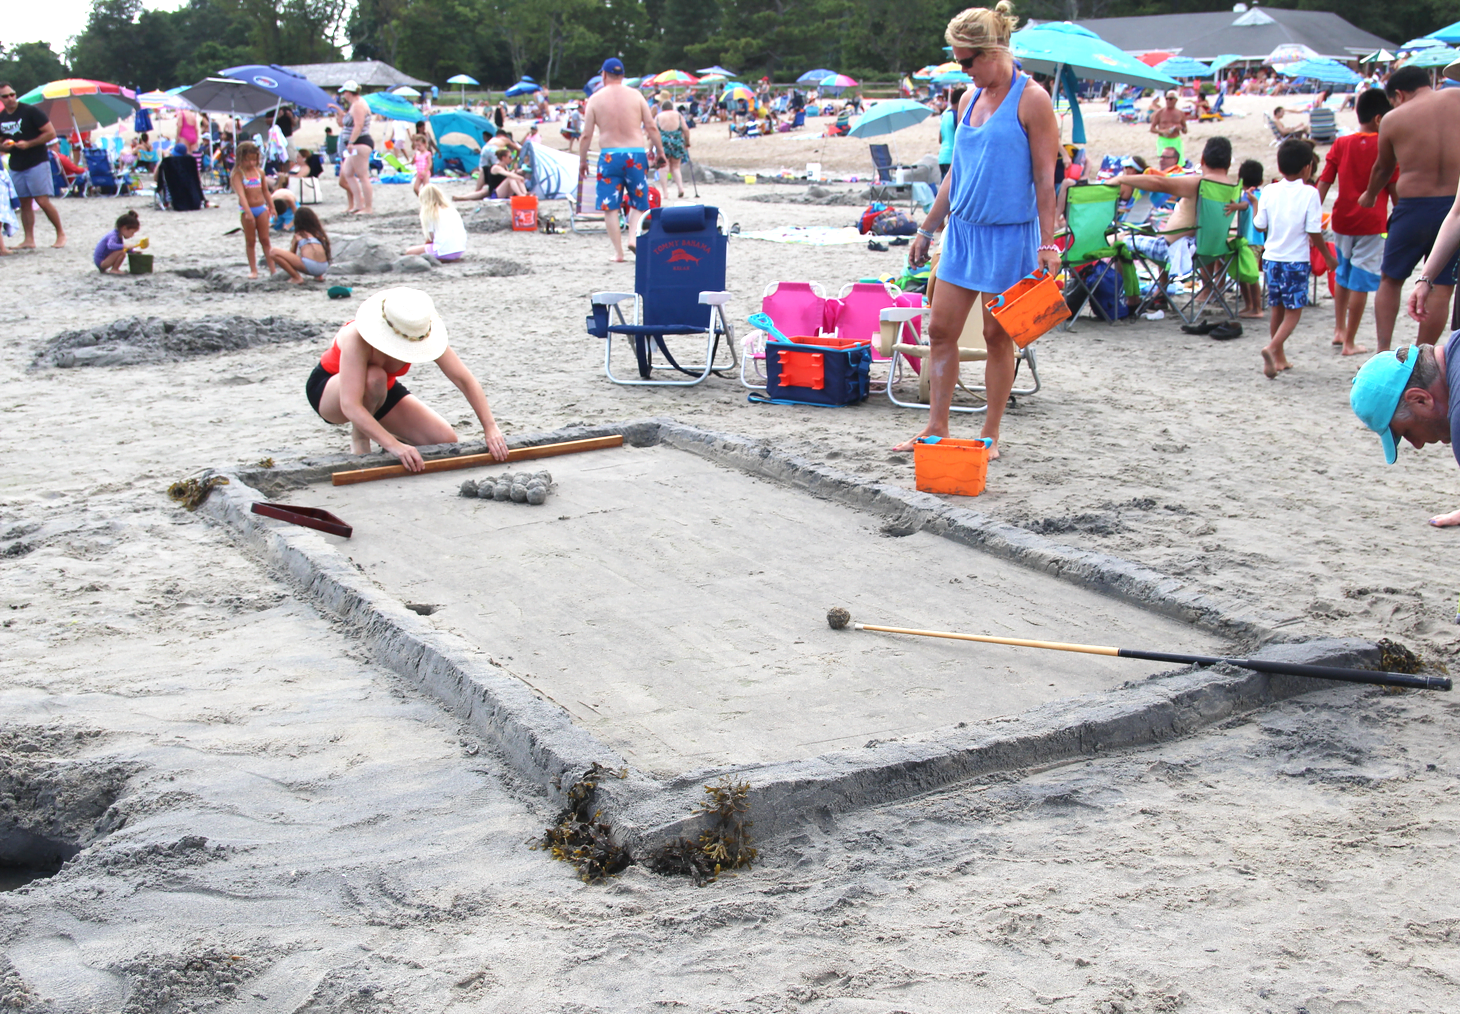 Sand Blast at Tod's Point was hosted by the Greenwich Dept of Parks & Rec and the Greenwich Arts Council. July 27, 2019 Photo: Leslie Yager